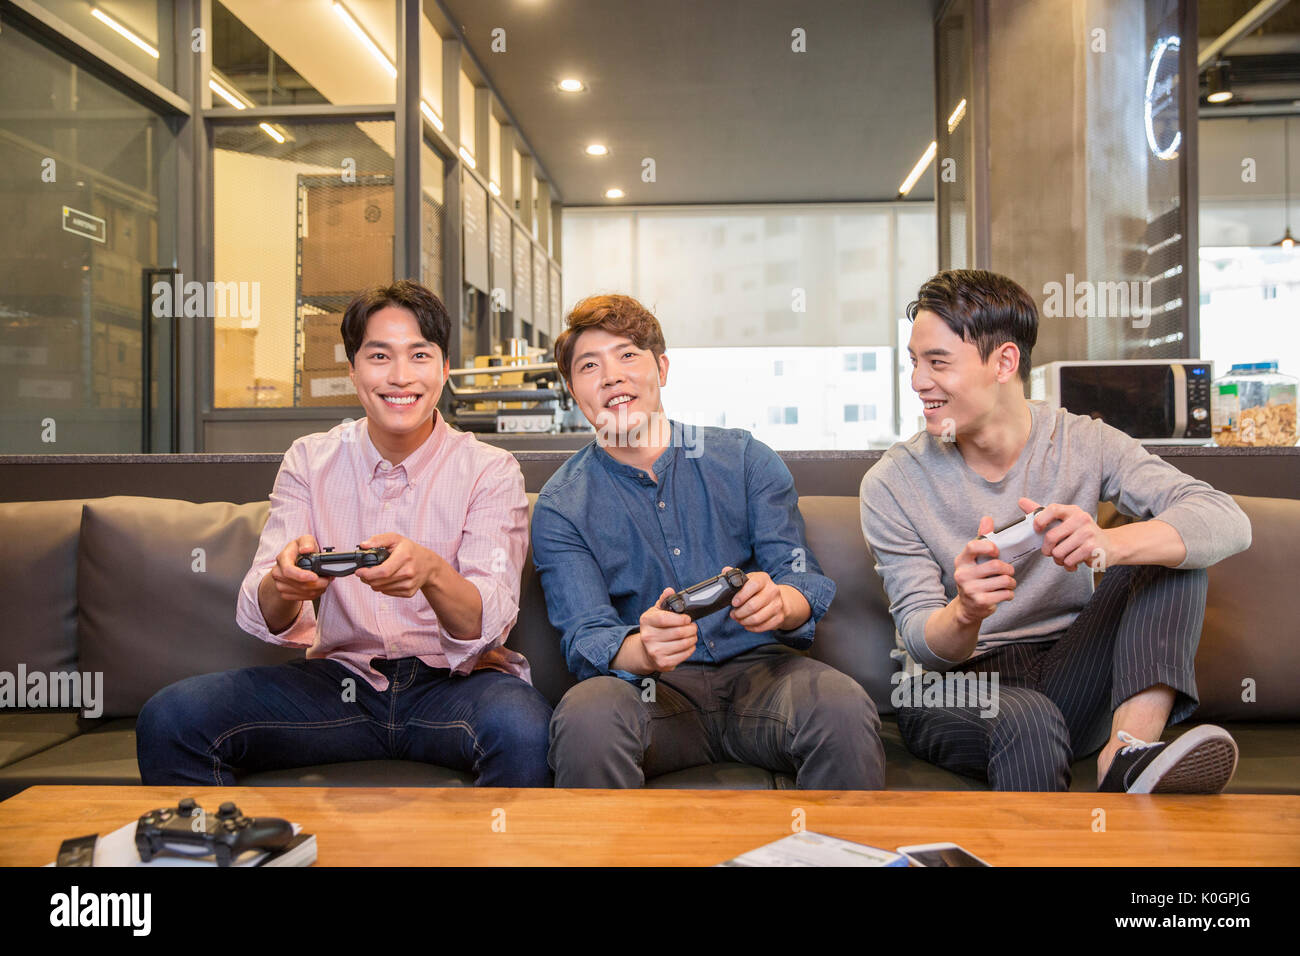 Three smiling coworkers playing video games Stock Photo